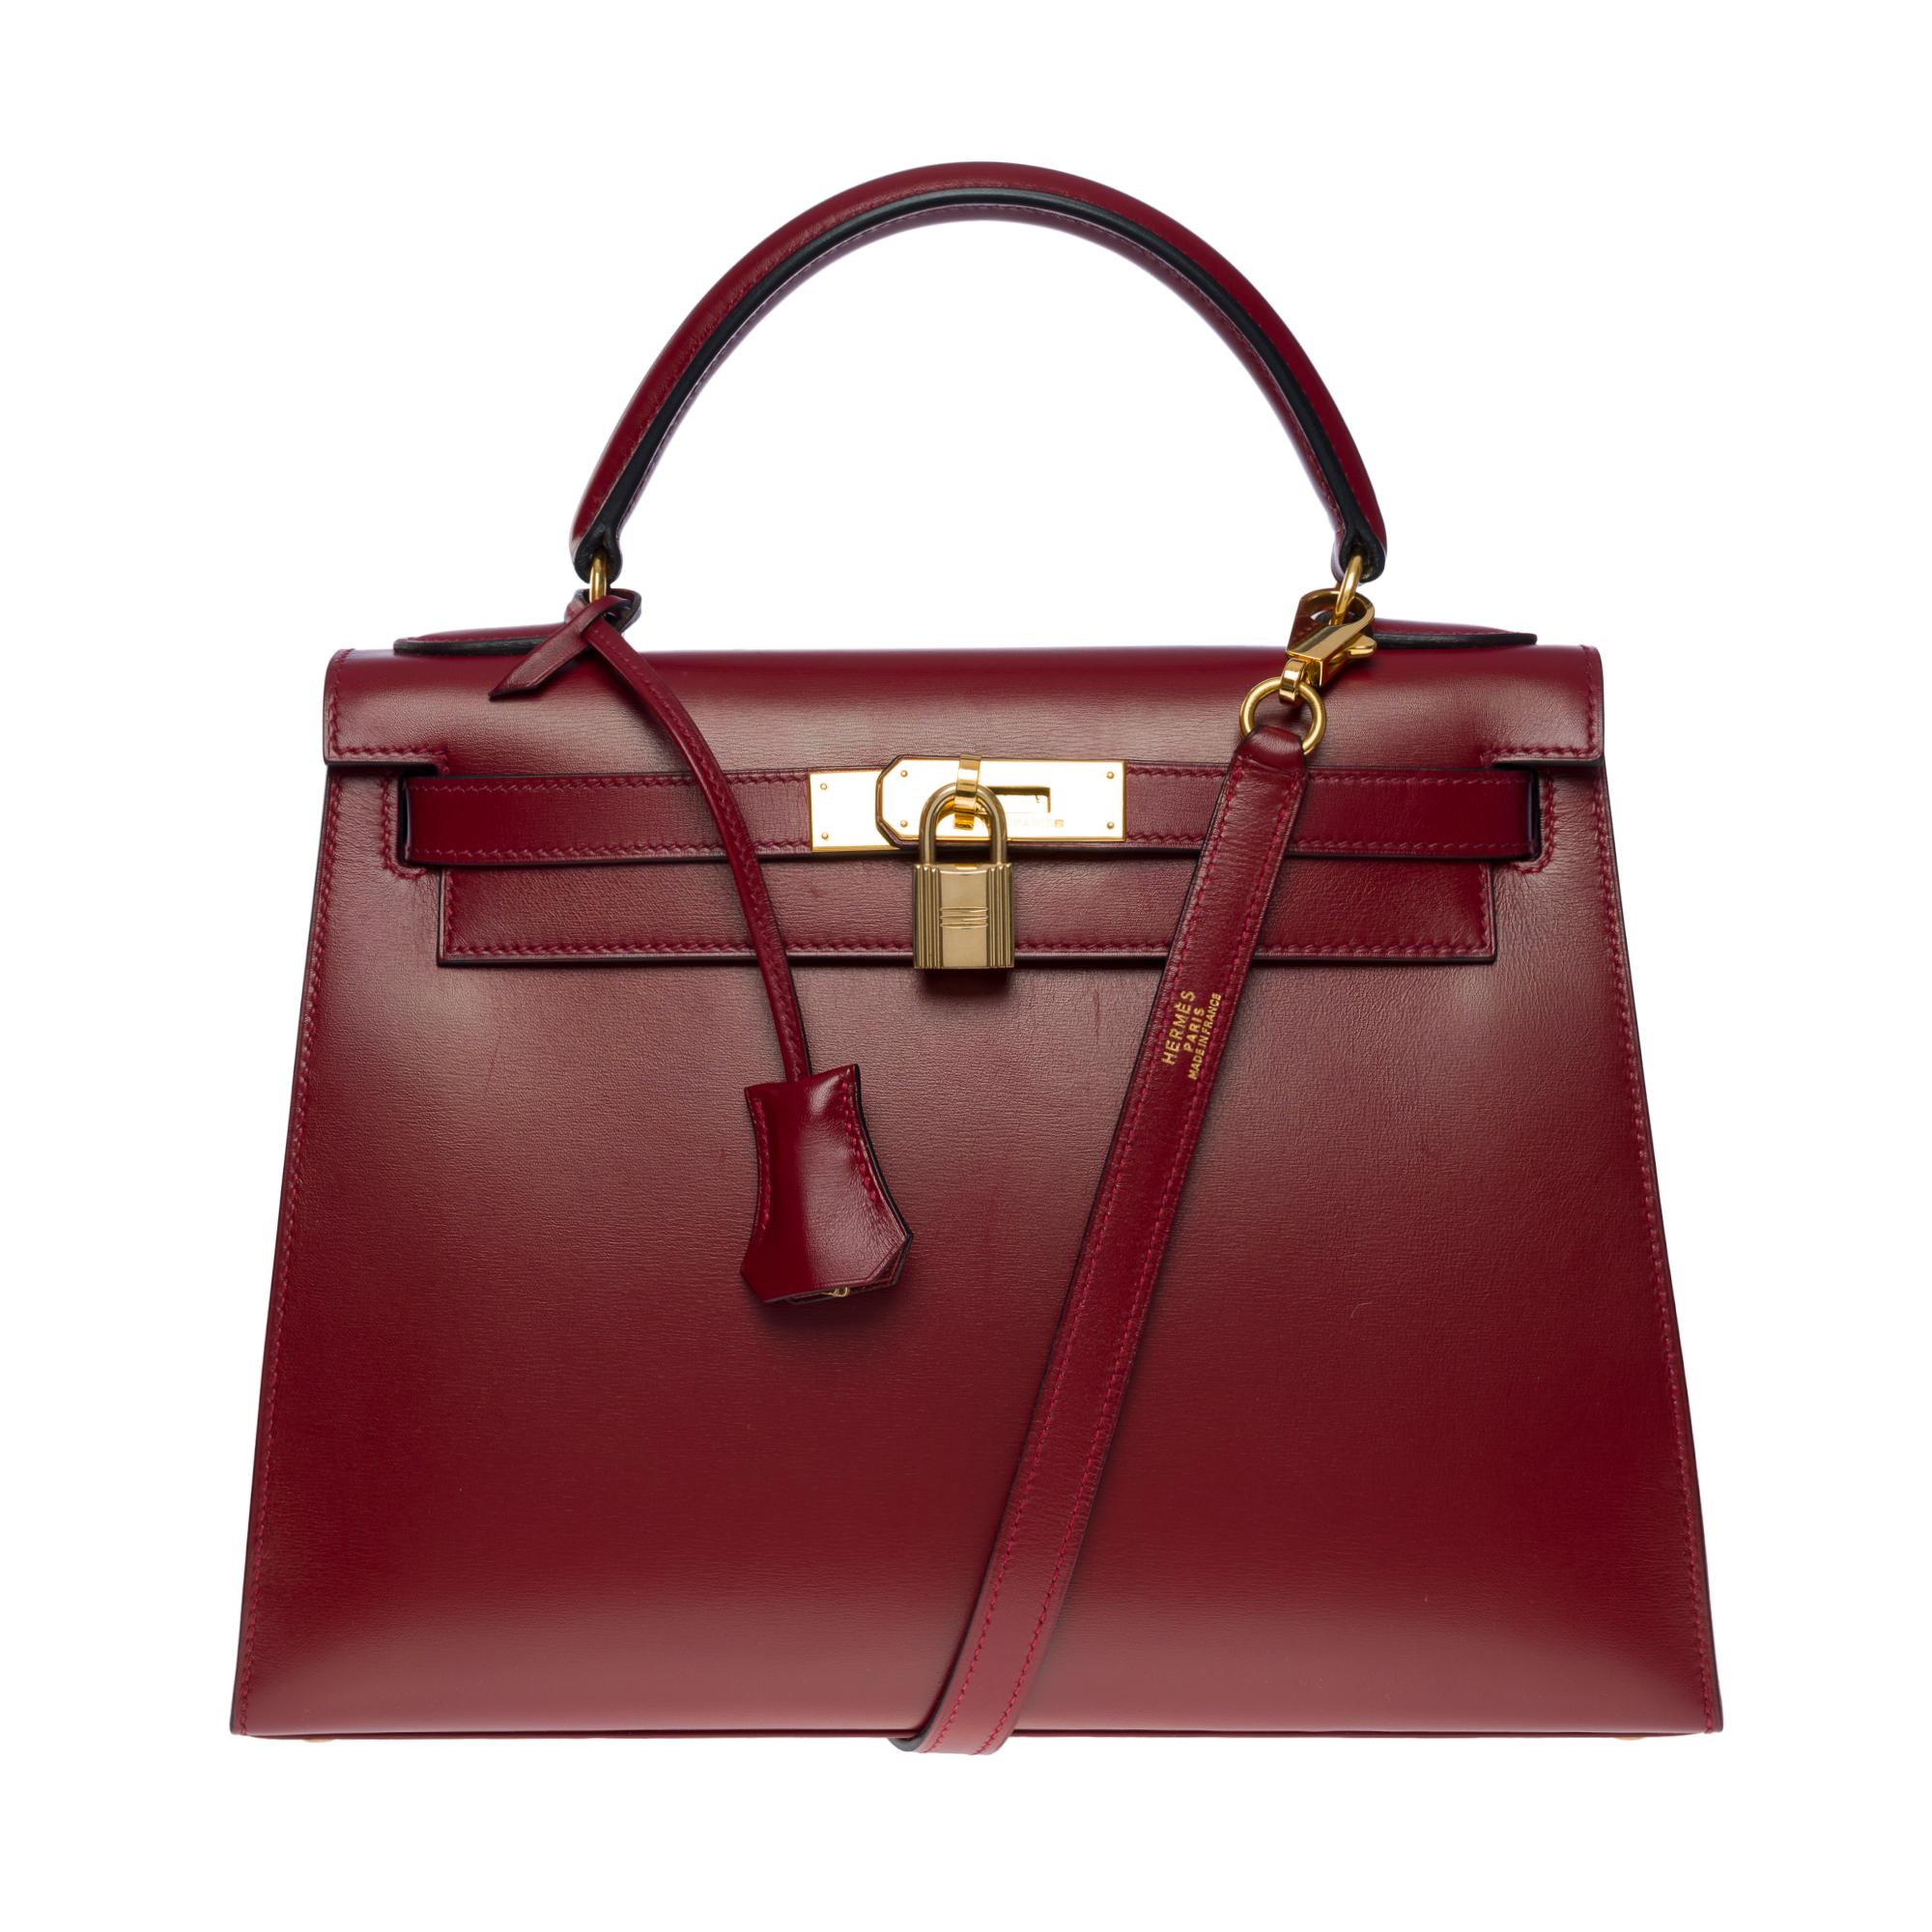 Exquisite Hermes Kelly 28 sellier handbag in Rouge H (burgundy) box calf leather, gold plated metal hardware, leather handle box red allowing a hand , shoulder or crossbody carry
Flap closure
Red leather lining, one zippered pocket, two patch